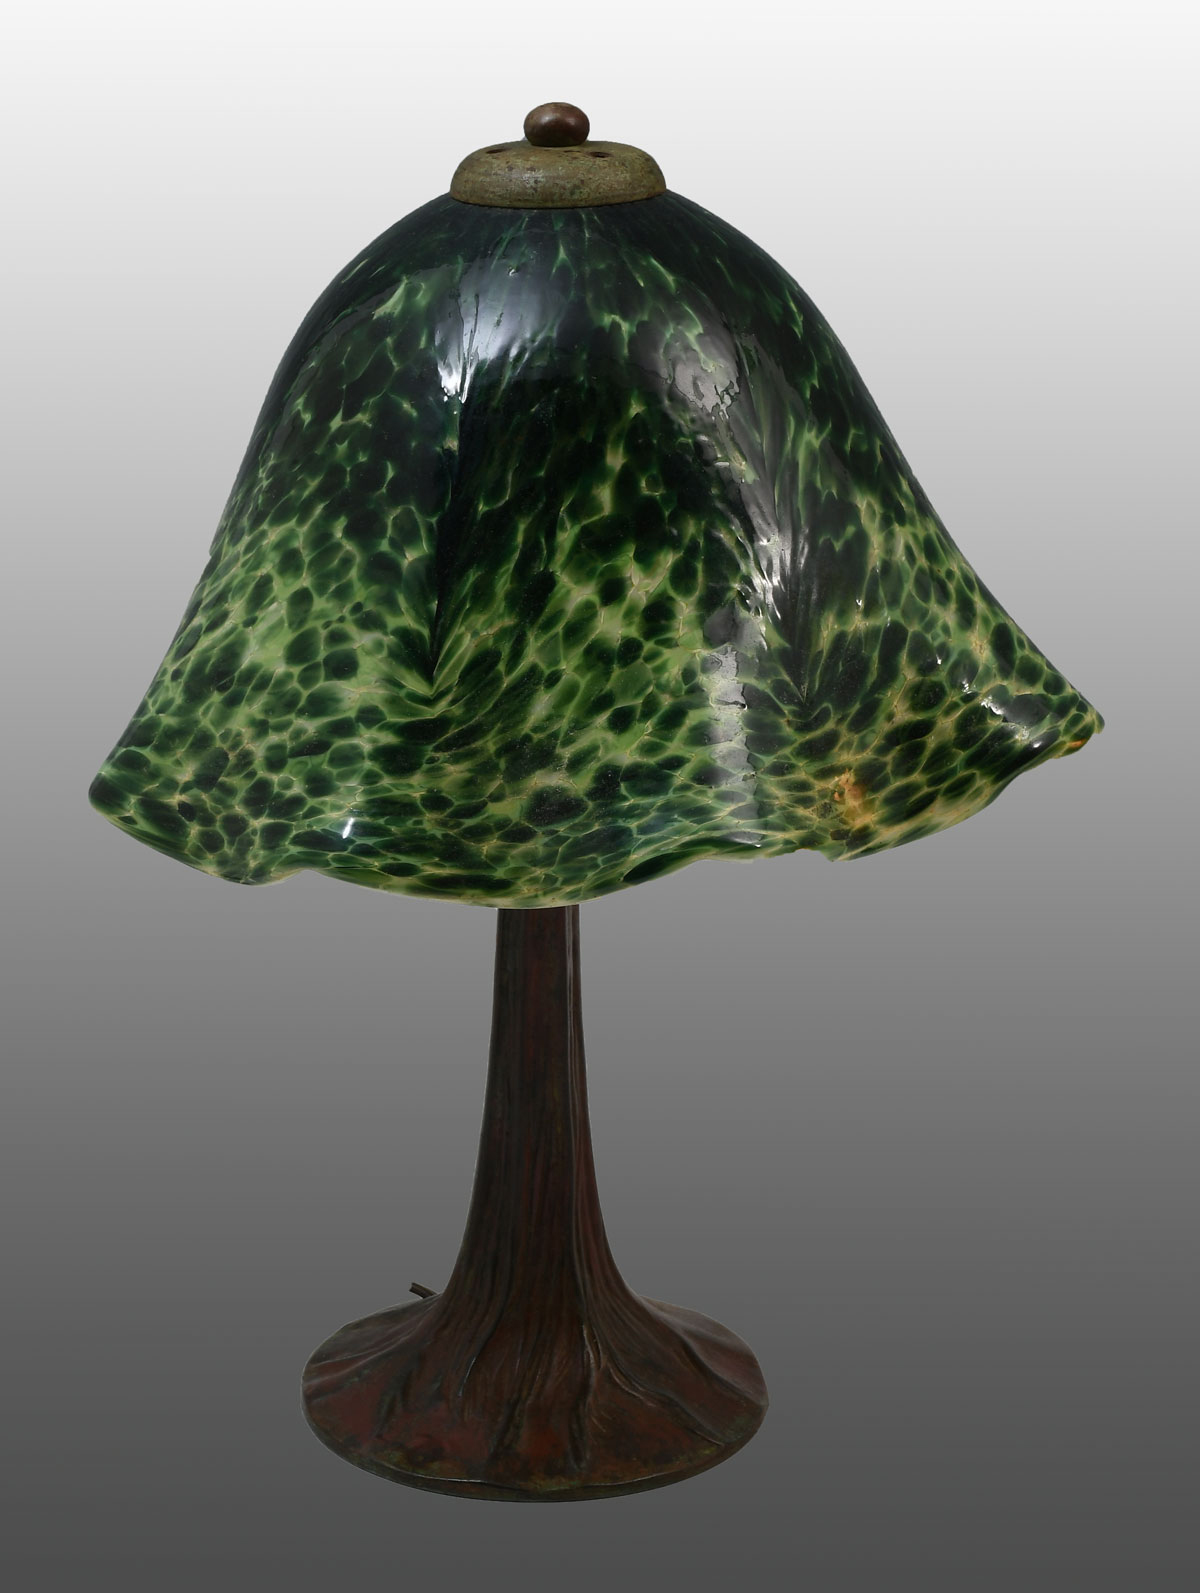 TREE FORM GLASS SHADE TABLE LAMP  275ef8